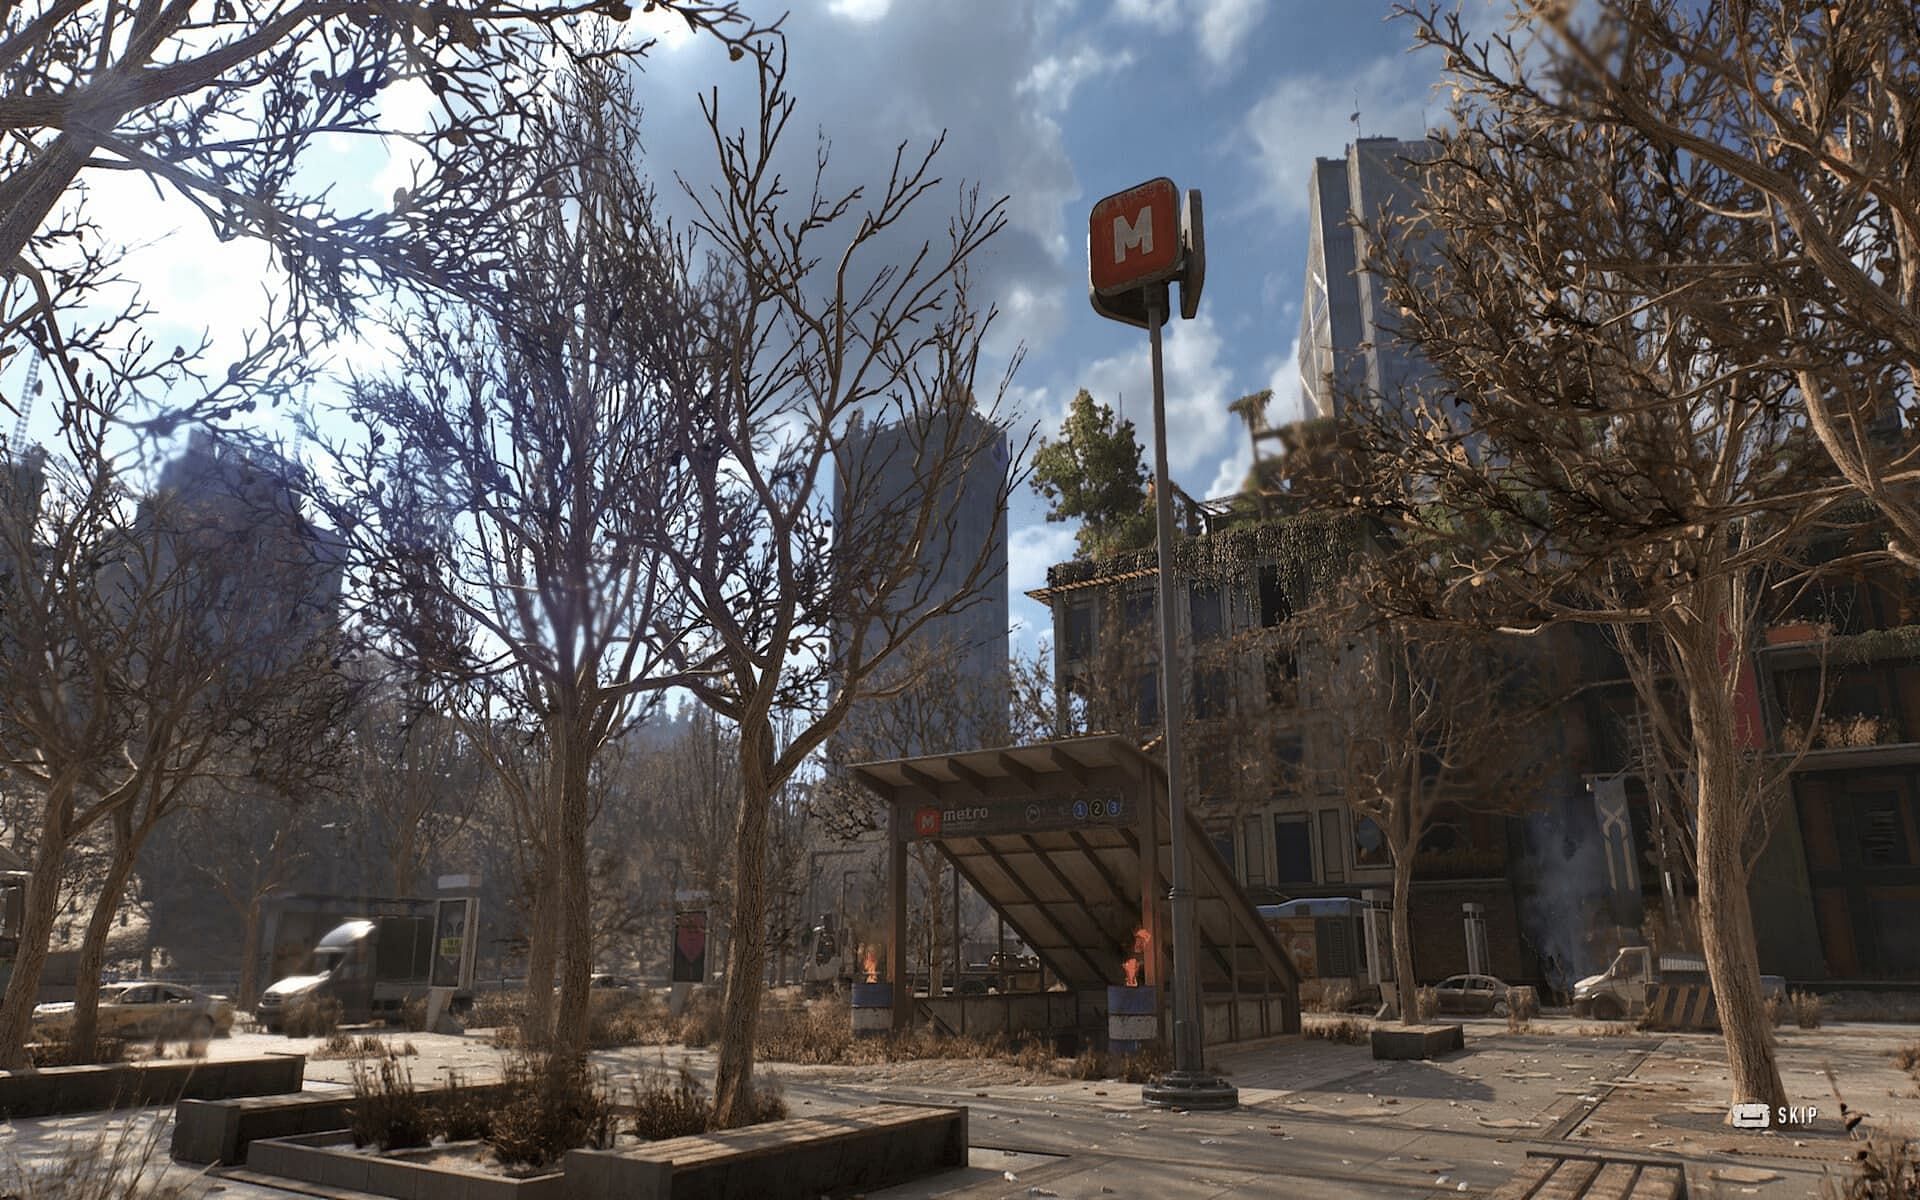 Dying Light 2 is filled with safe zones for players to take shelter (Image via Techland)